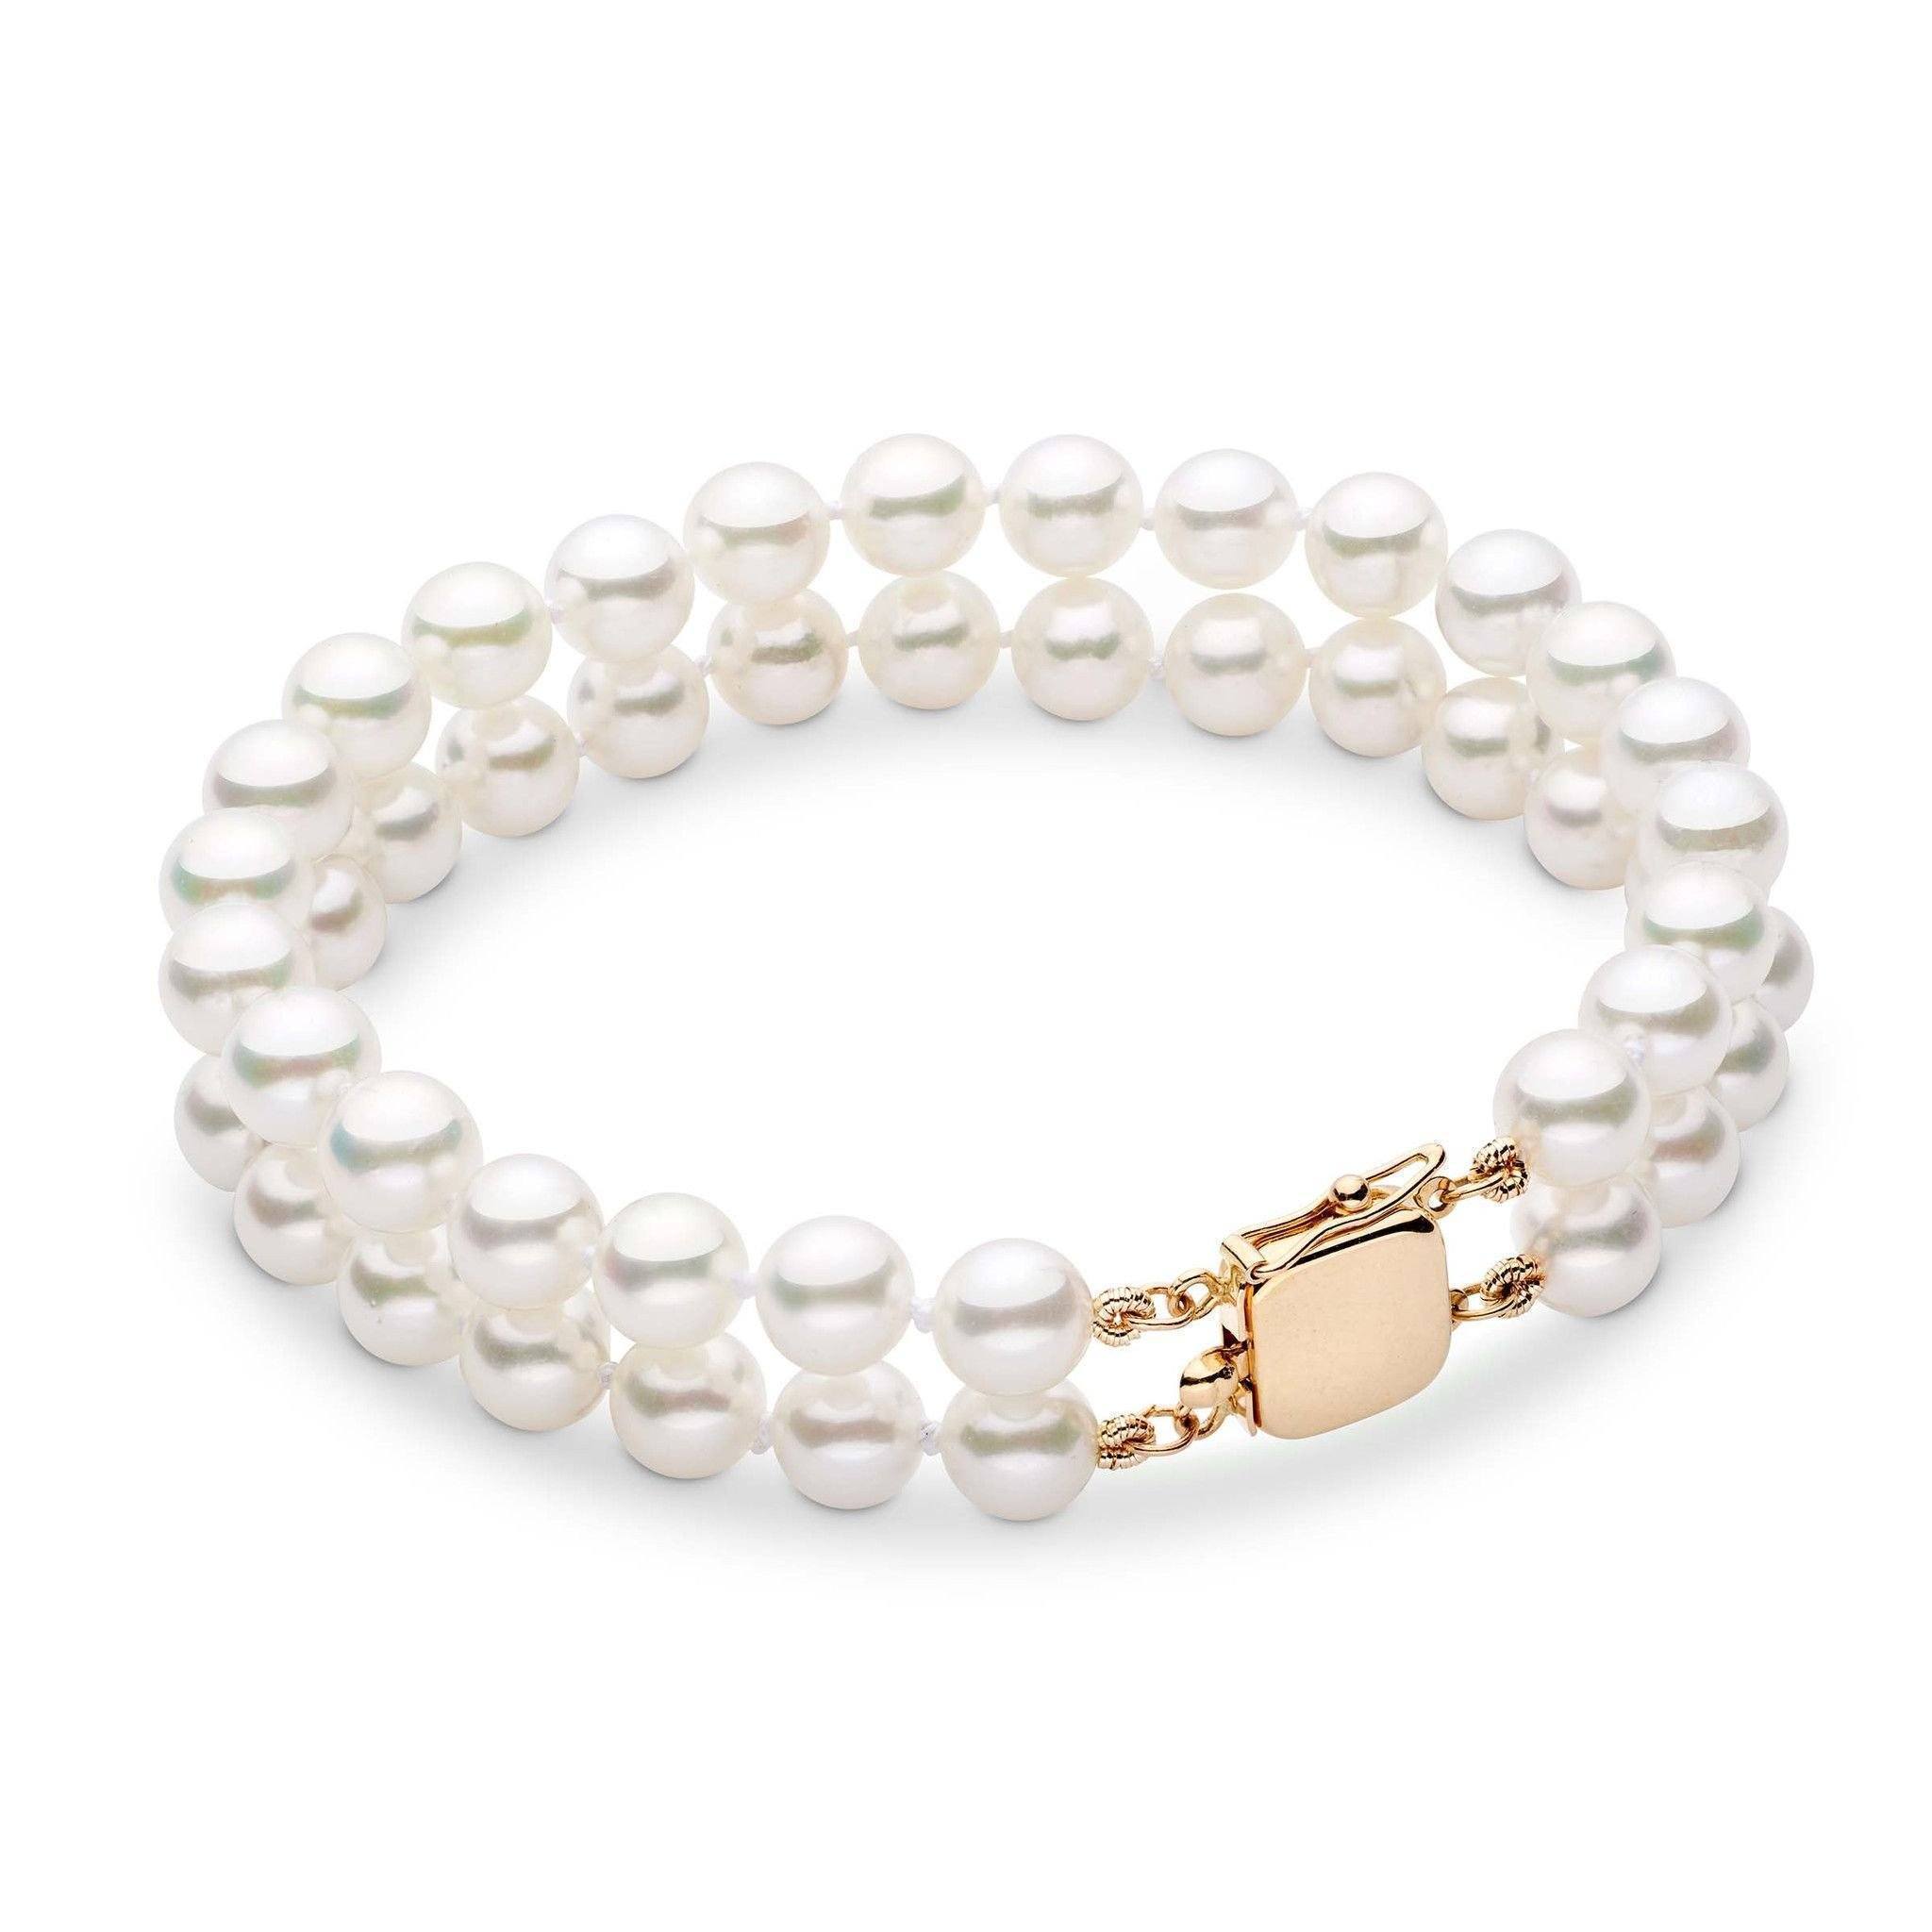 Products 6.5-7.0 mm Double Strand White Akoya AAA Pearl Bracelet  Yellow gold clasp